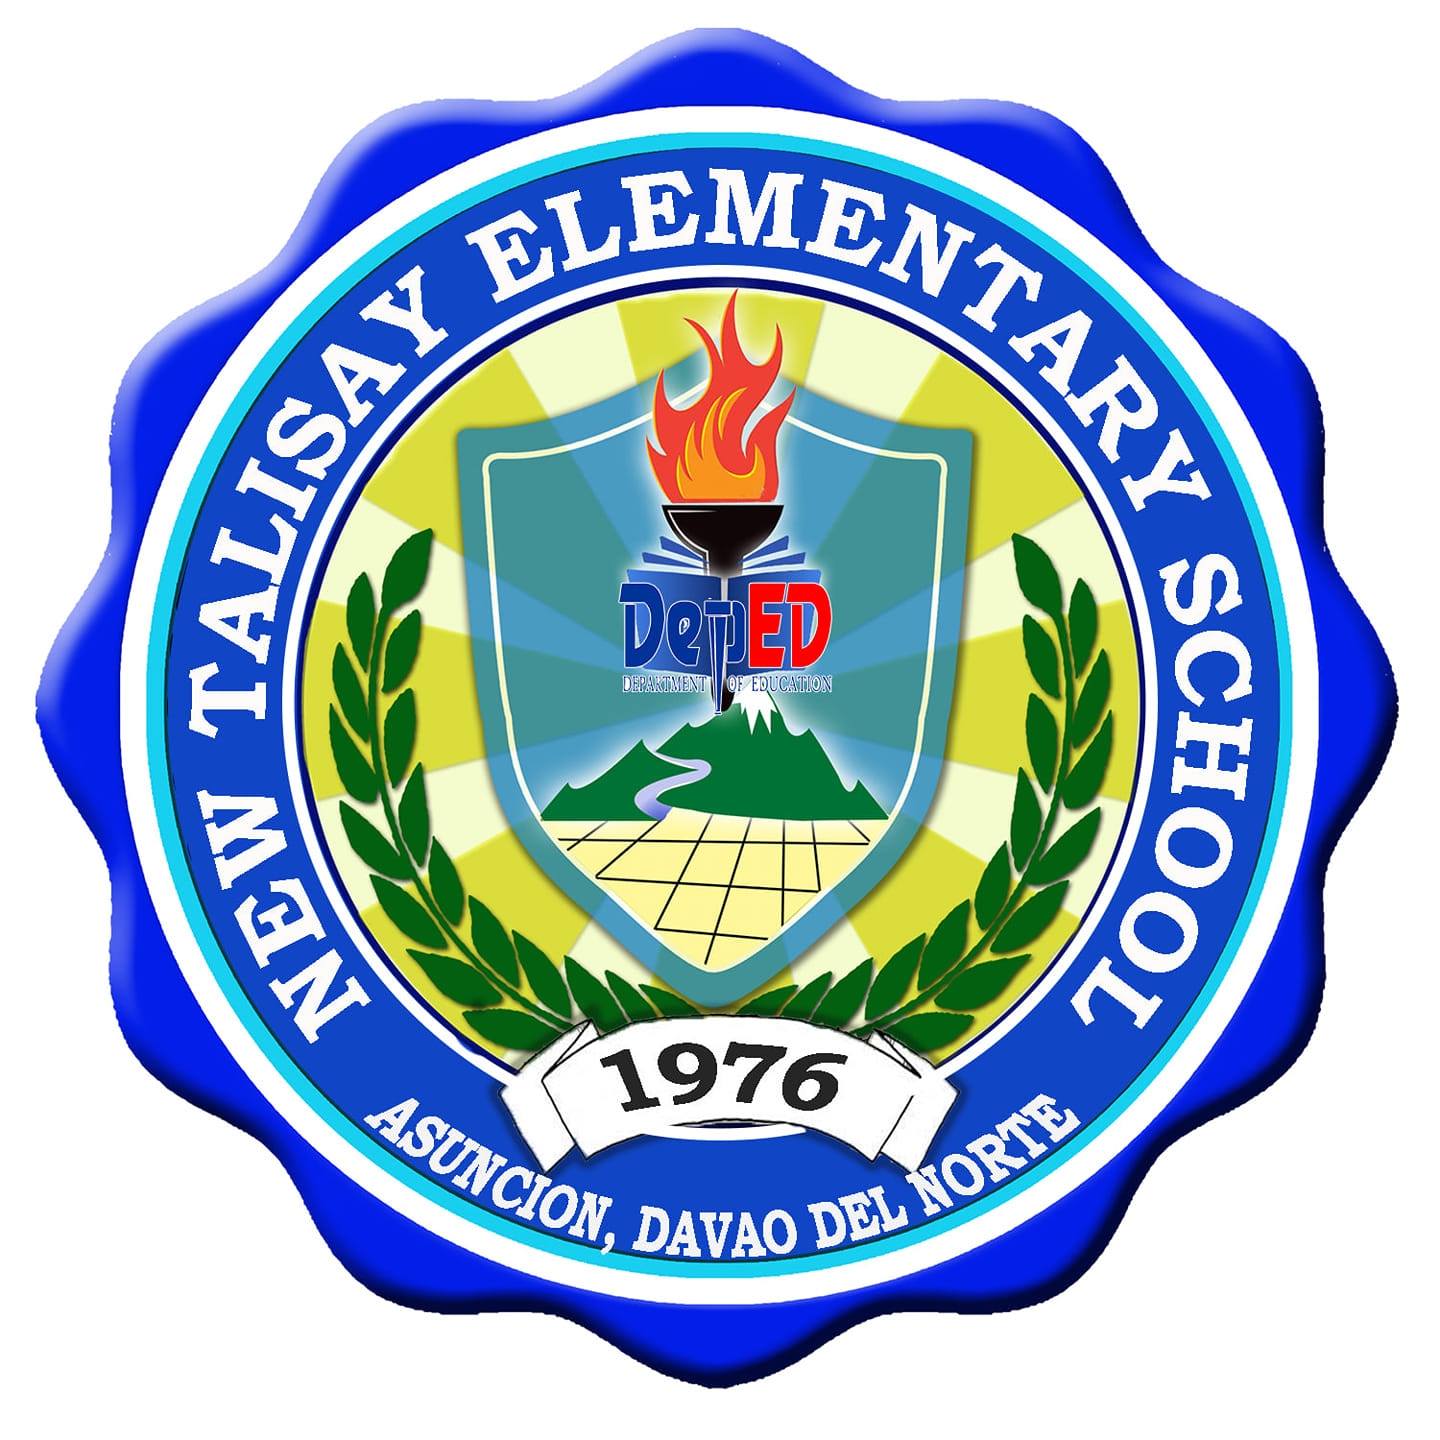 You are currently viewing New Talisay Elementary School – Asuncion